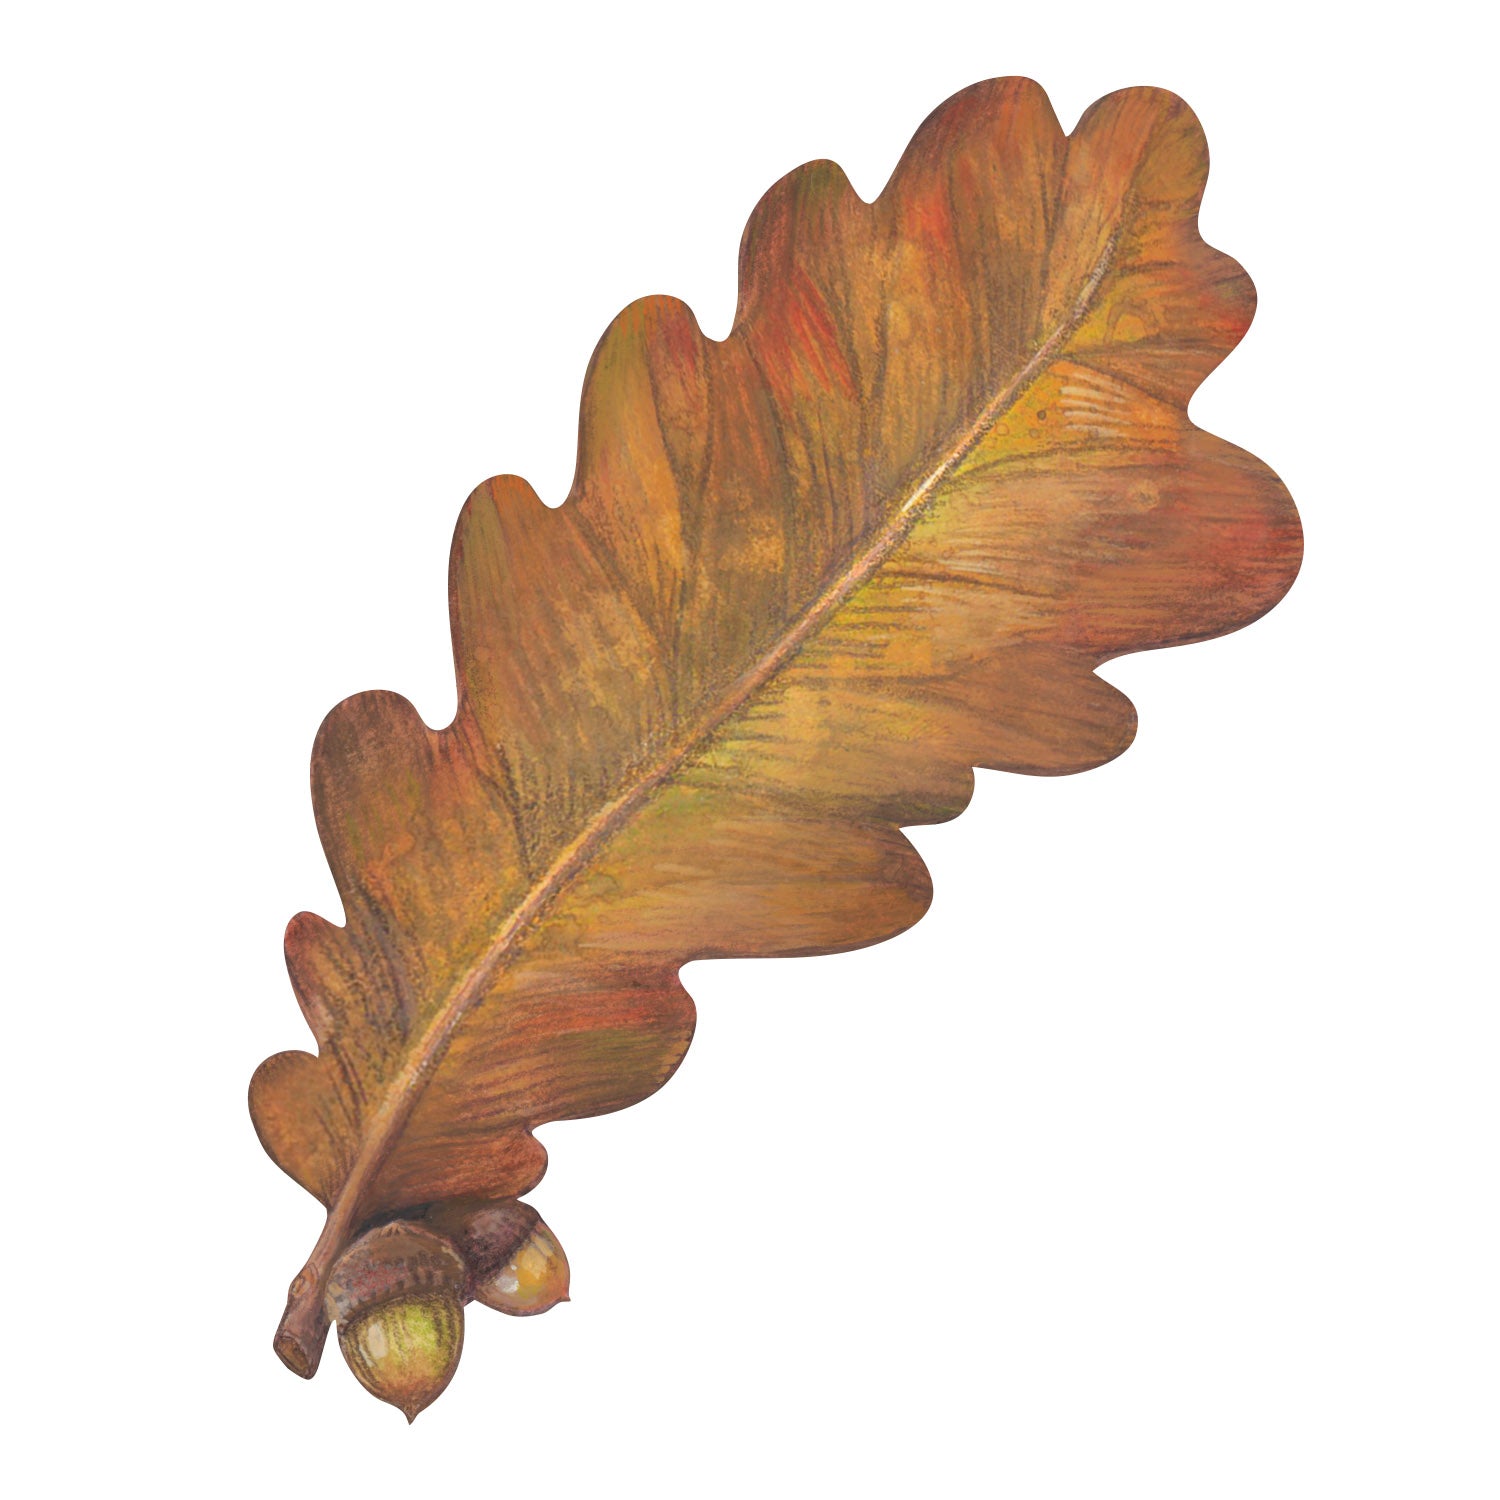 A die-cut illustration of a vibrant, orangey-brown oak leaf with two acorns attached at the stem. 